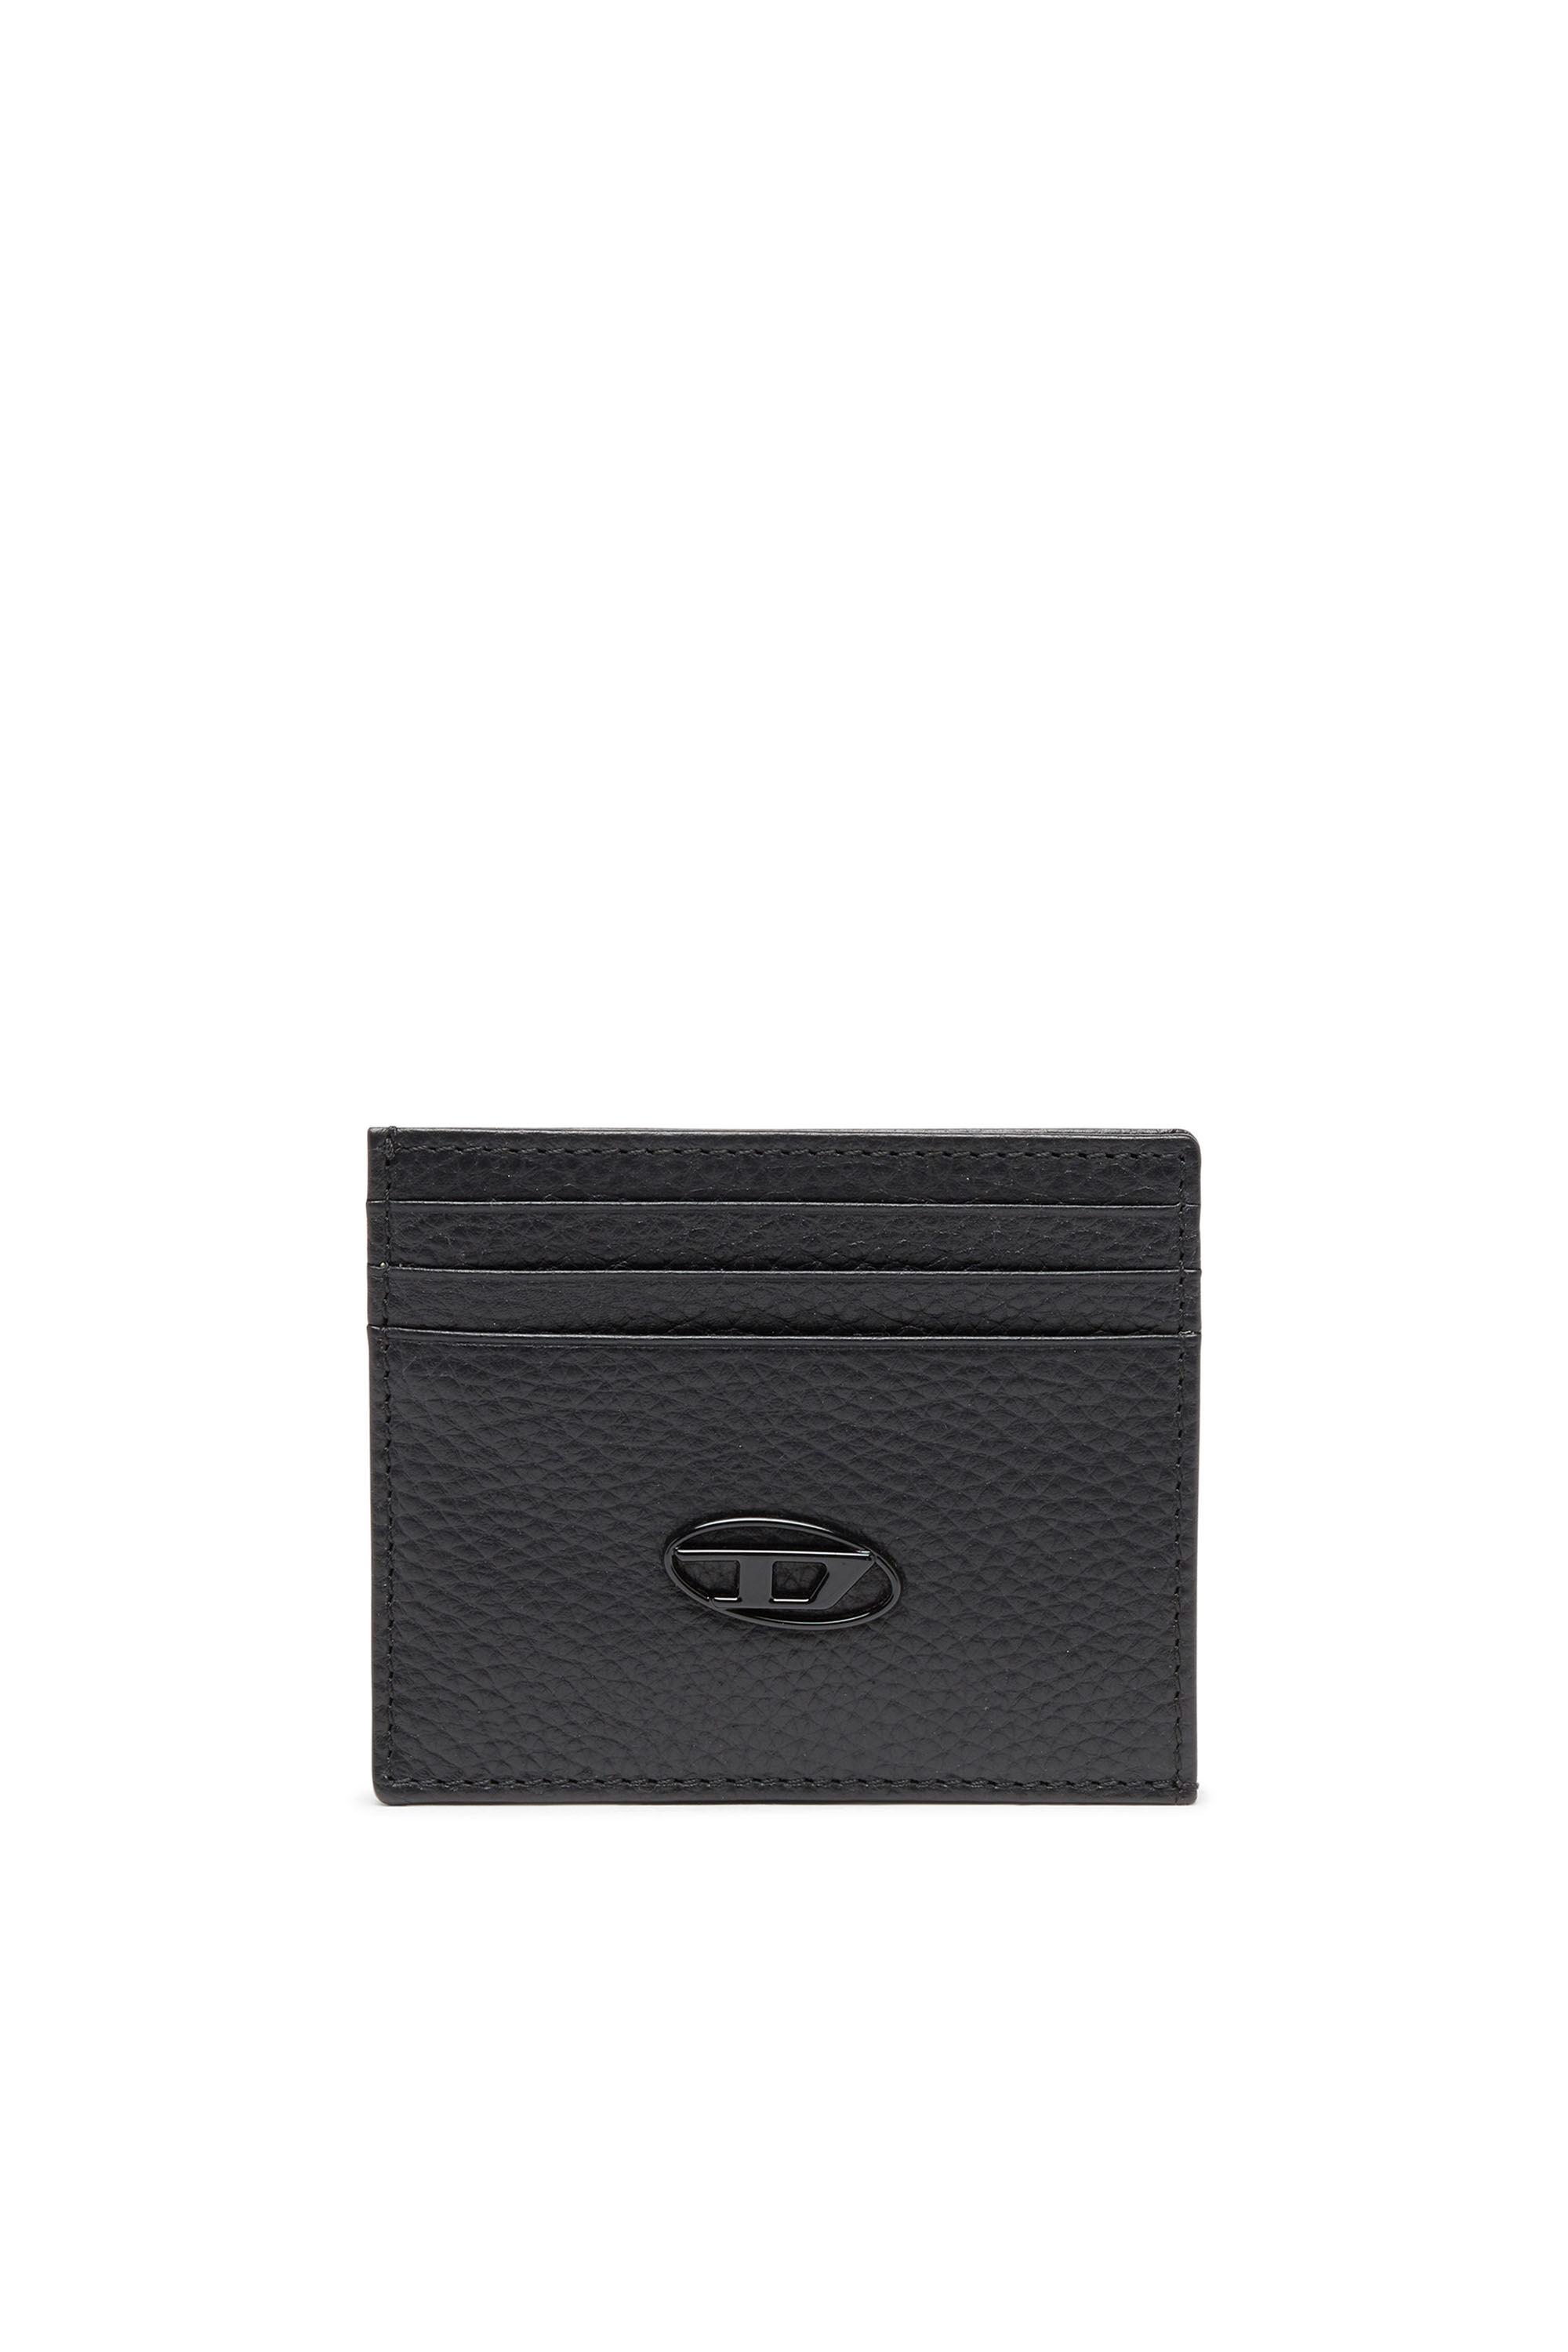 Diesel - CARD CASE, Man Card case in grained leather in Black - Image 1